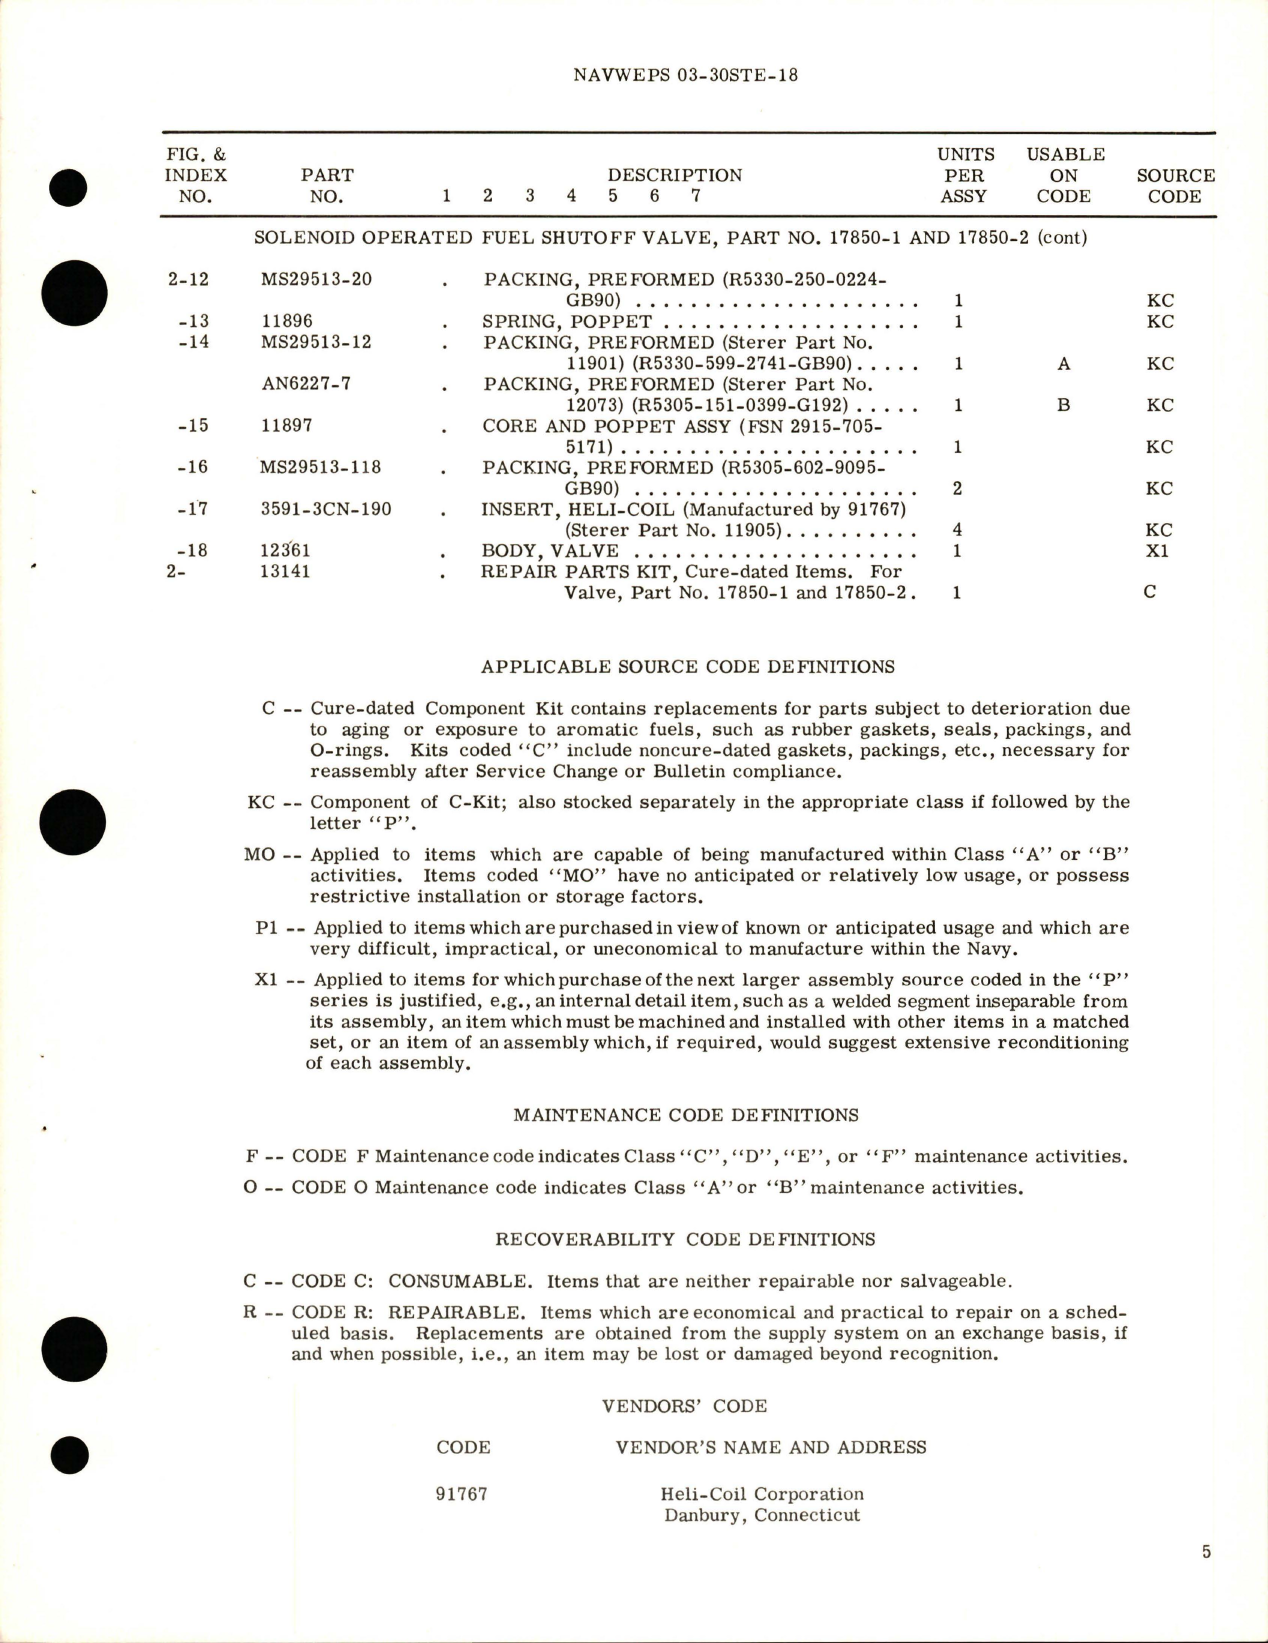 Sample page 5 from AirCorps Library document: Overhaul Instructions with Parts Breakdown for Solenoid Operated Fuel Shutoff Valve - Part 17850-1 and 17850-2